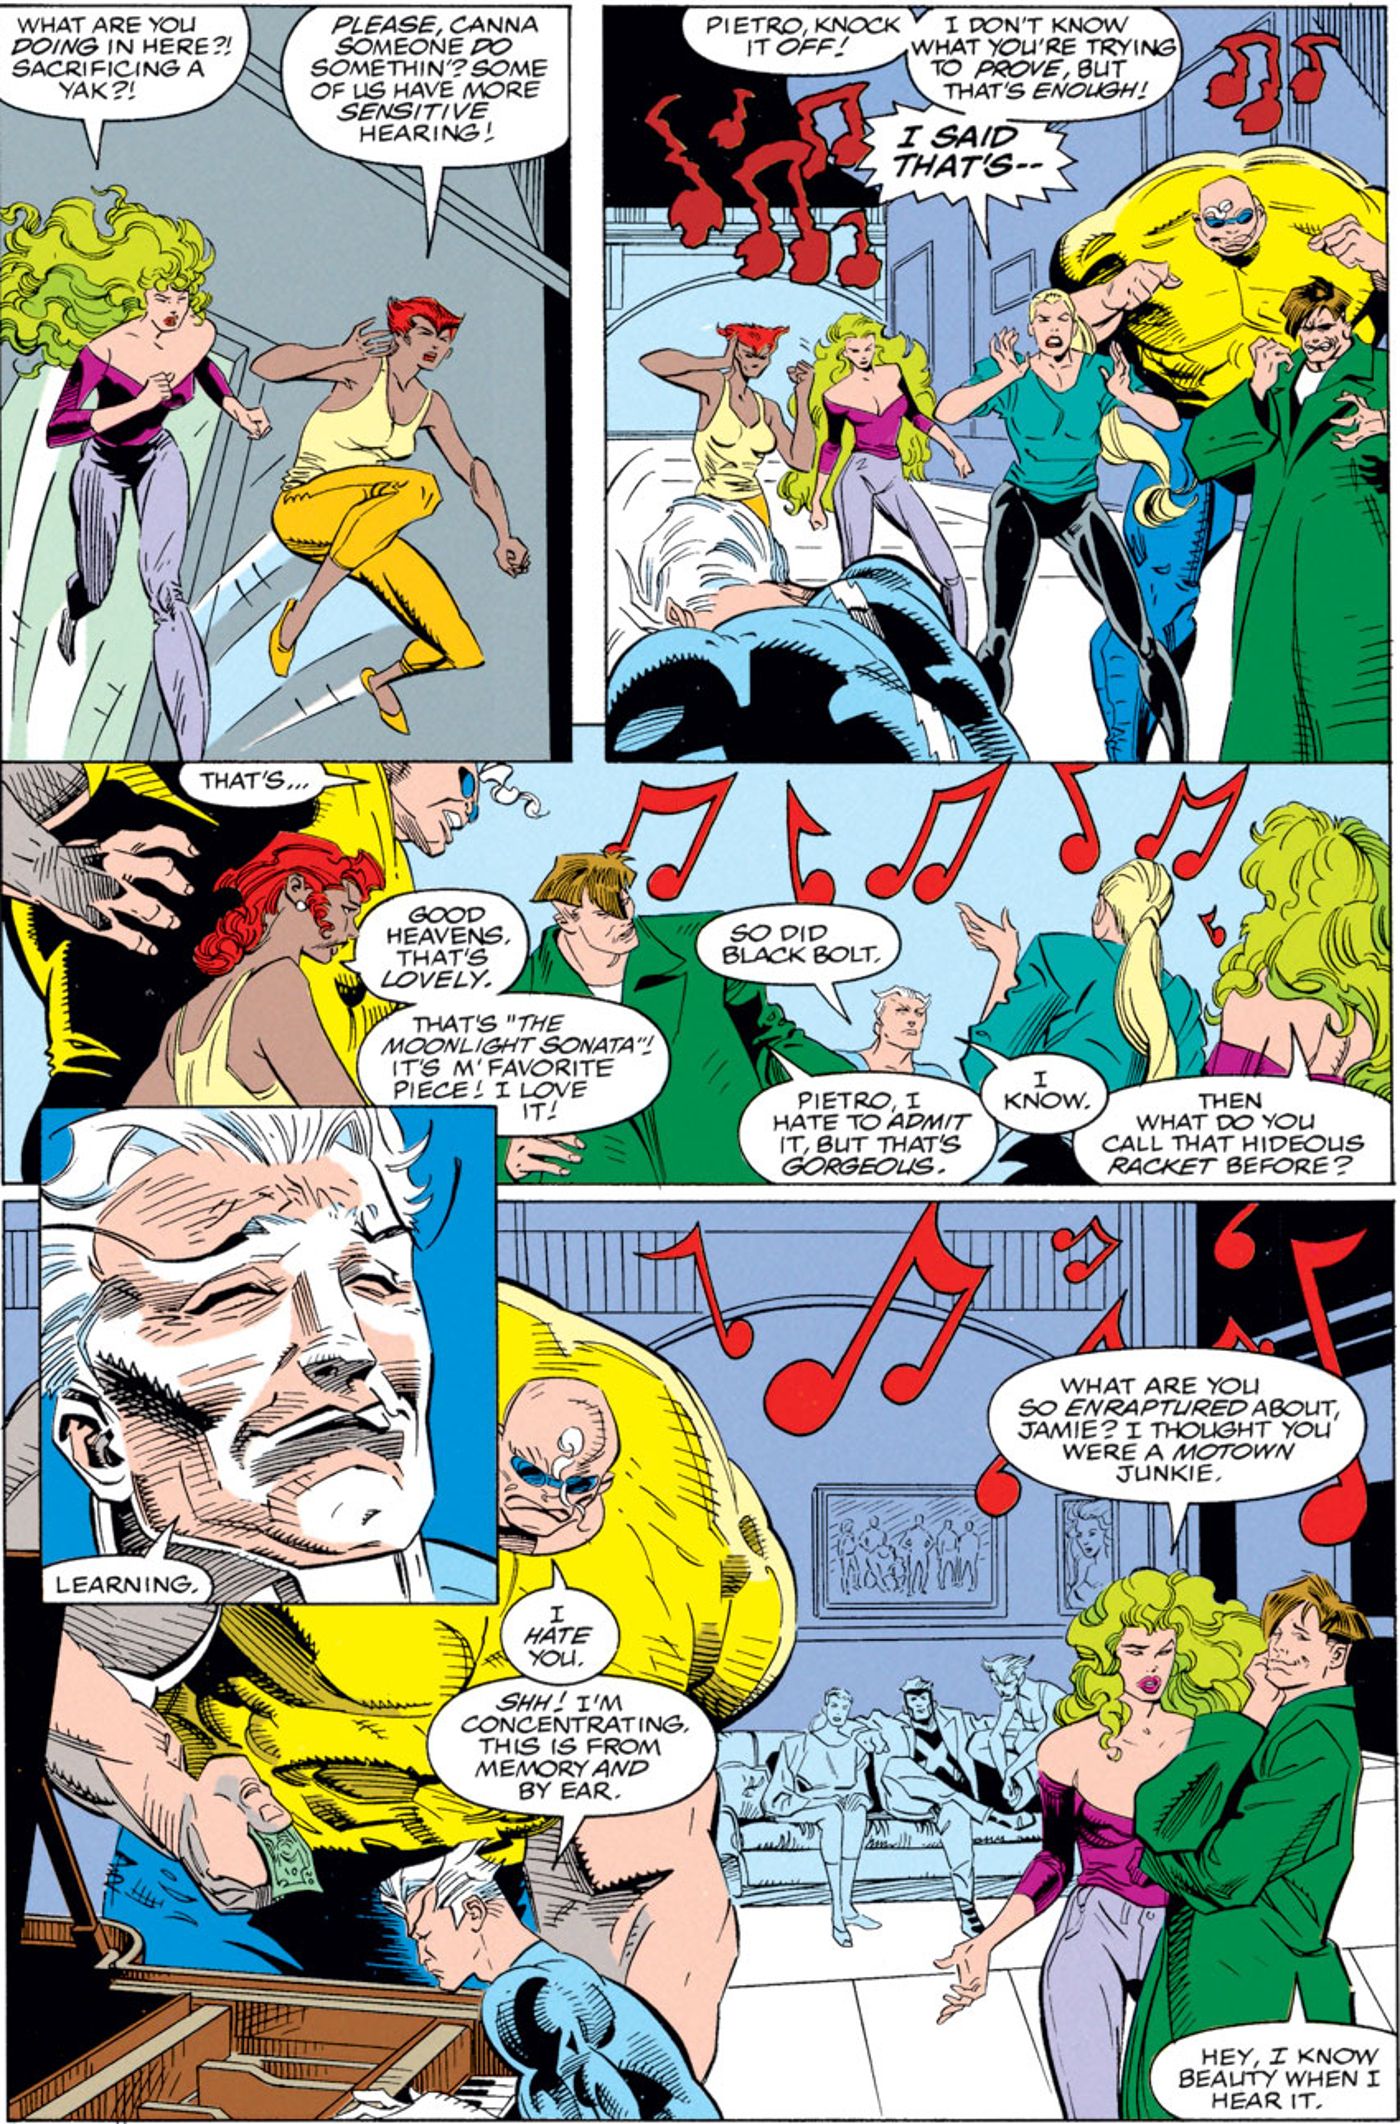 The X-Factor runs in as Quicksilver quickly and noisily learns to play piano. 